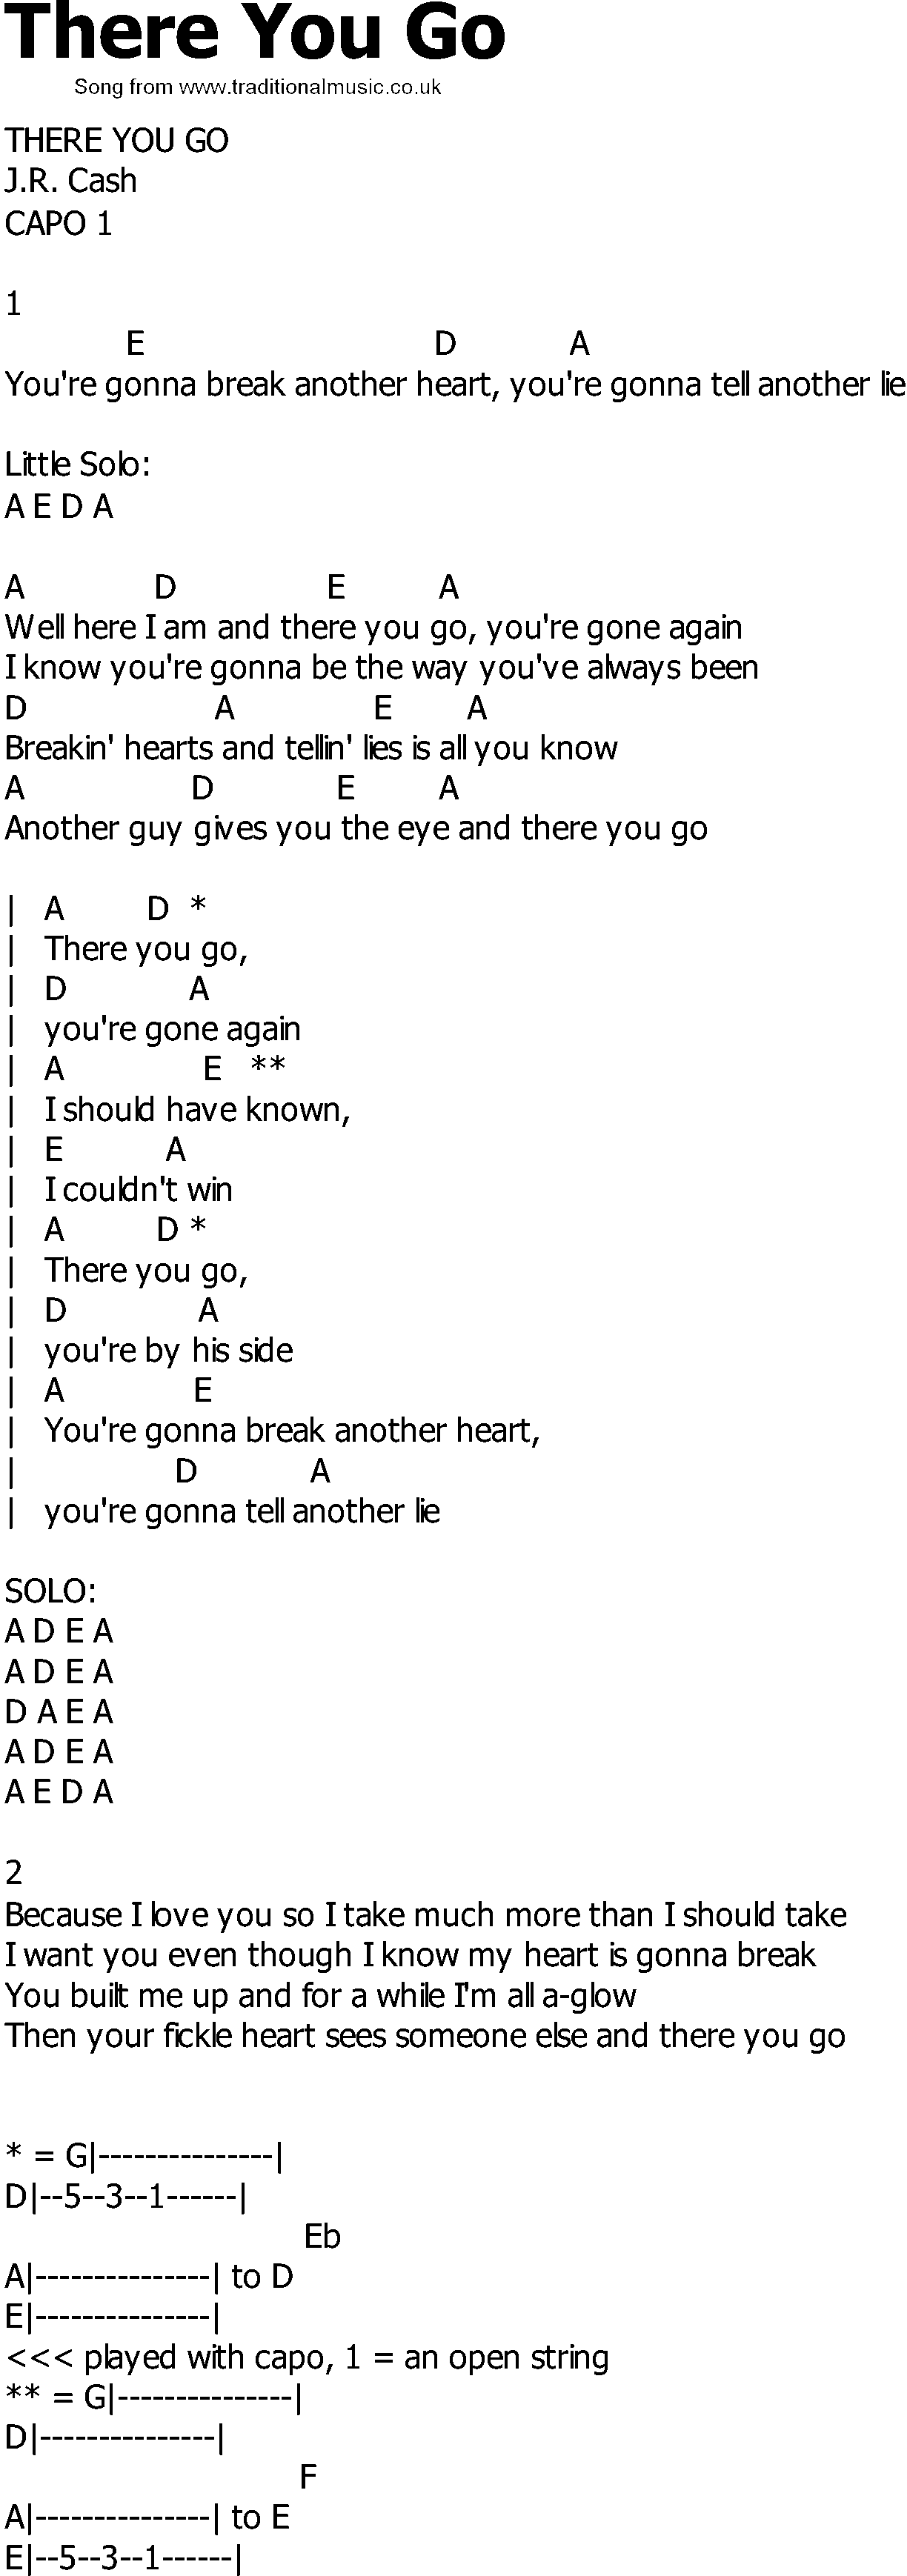 Old Country song lyrics with chords - There You Go